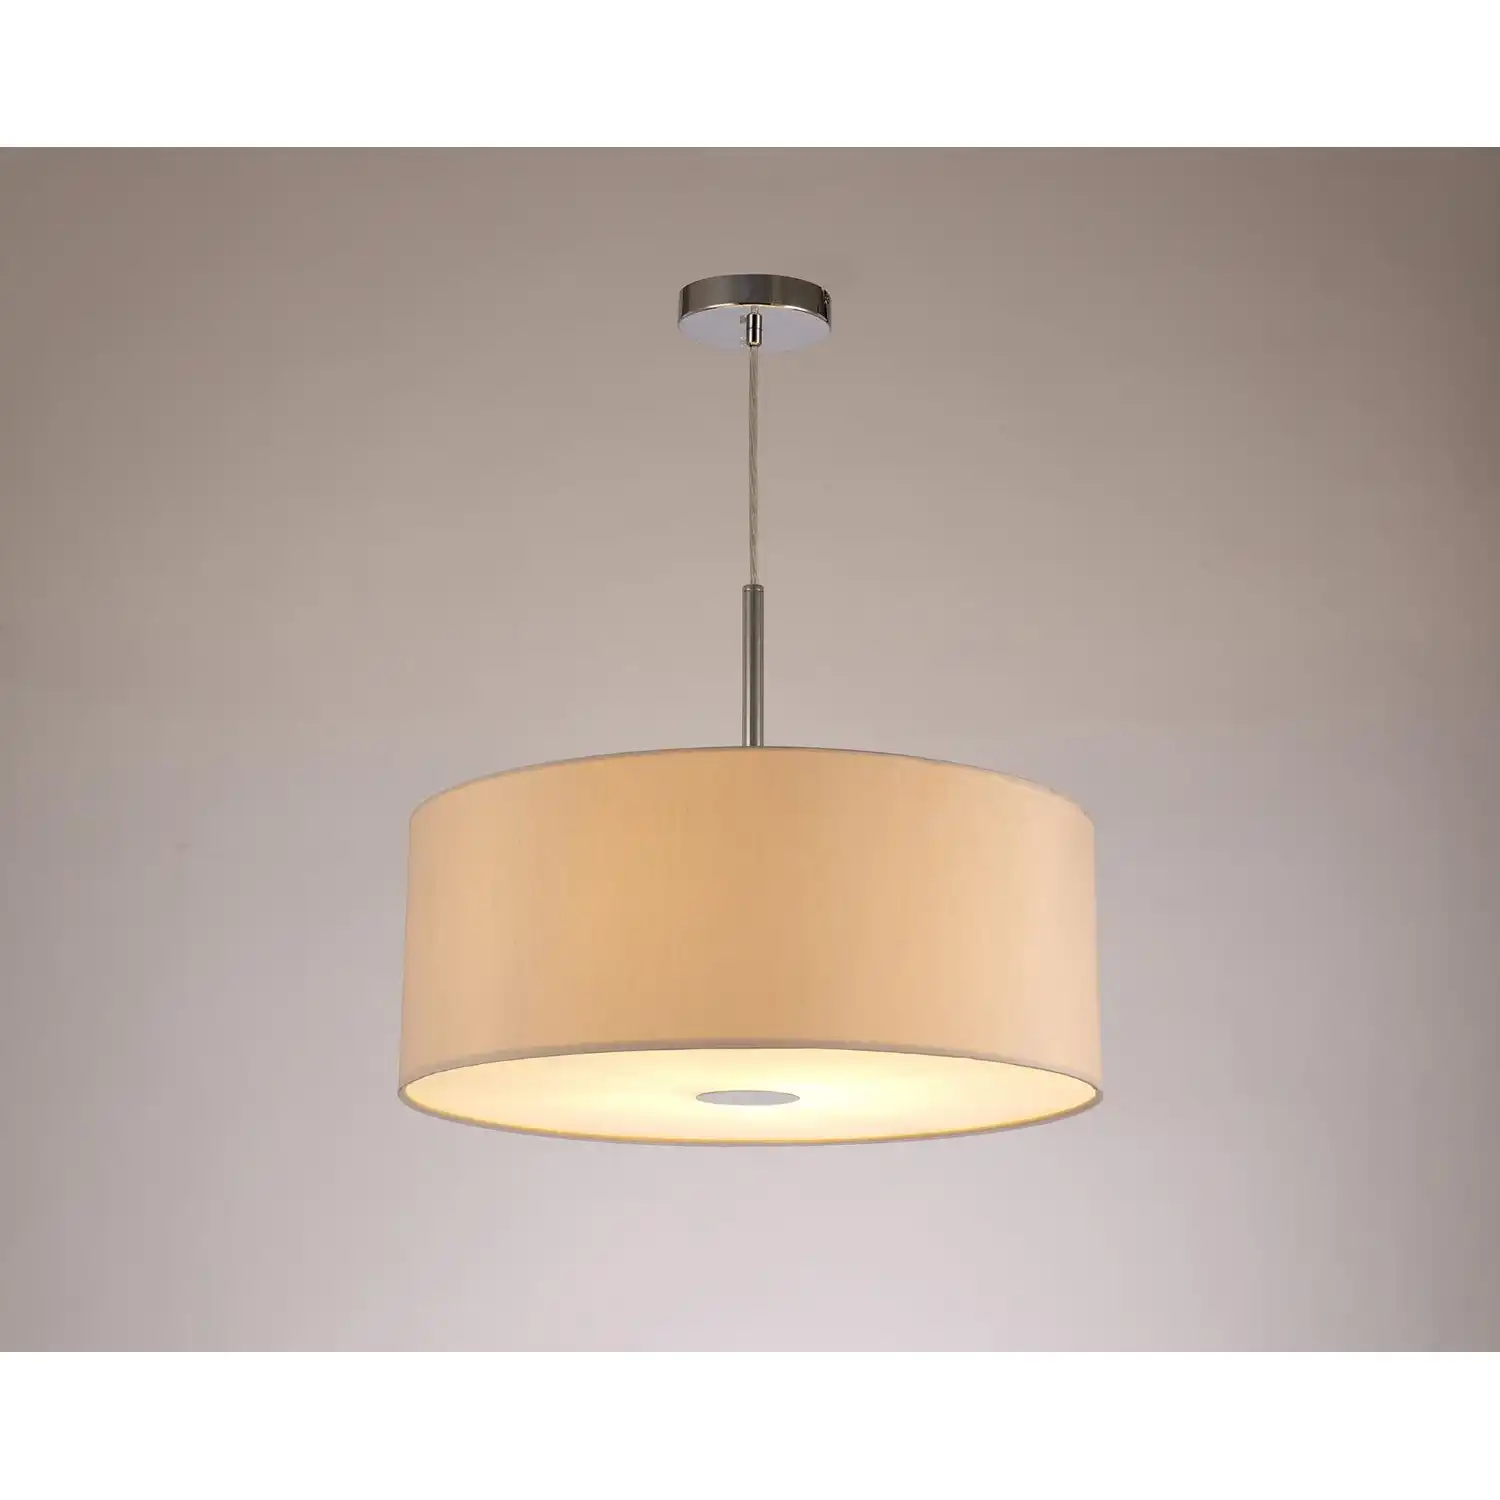 Baymont Polished Chrome 1 Light E27 3m Single Pendant c w 500mm Dual Faux Silk Shade, Nude Beige Moonlight c w 500mm Frosted PC Acrylic Diffuser